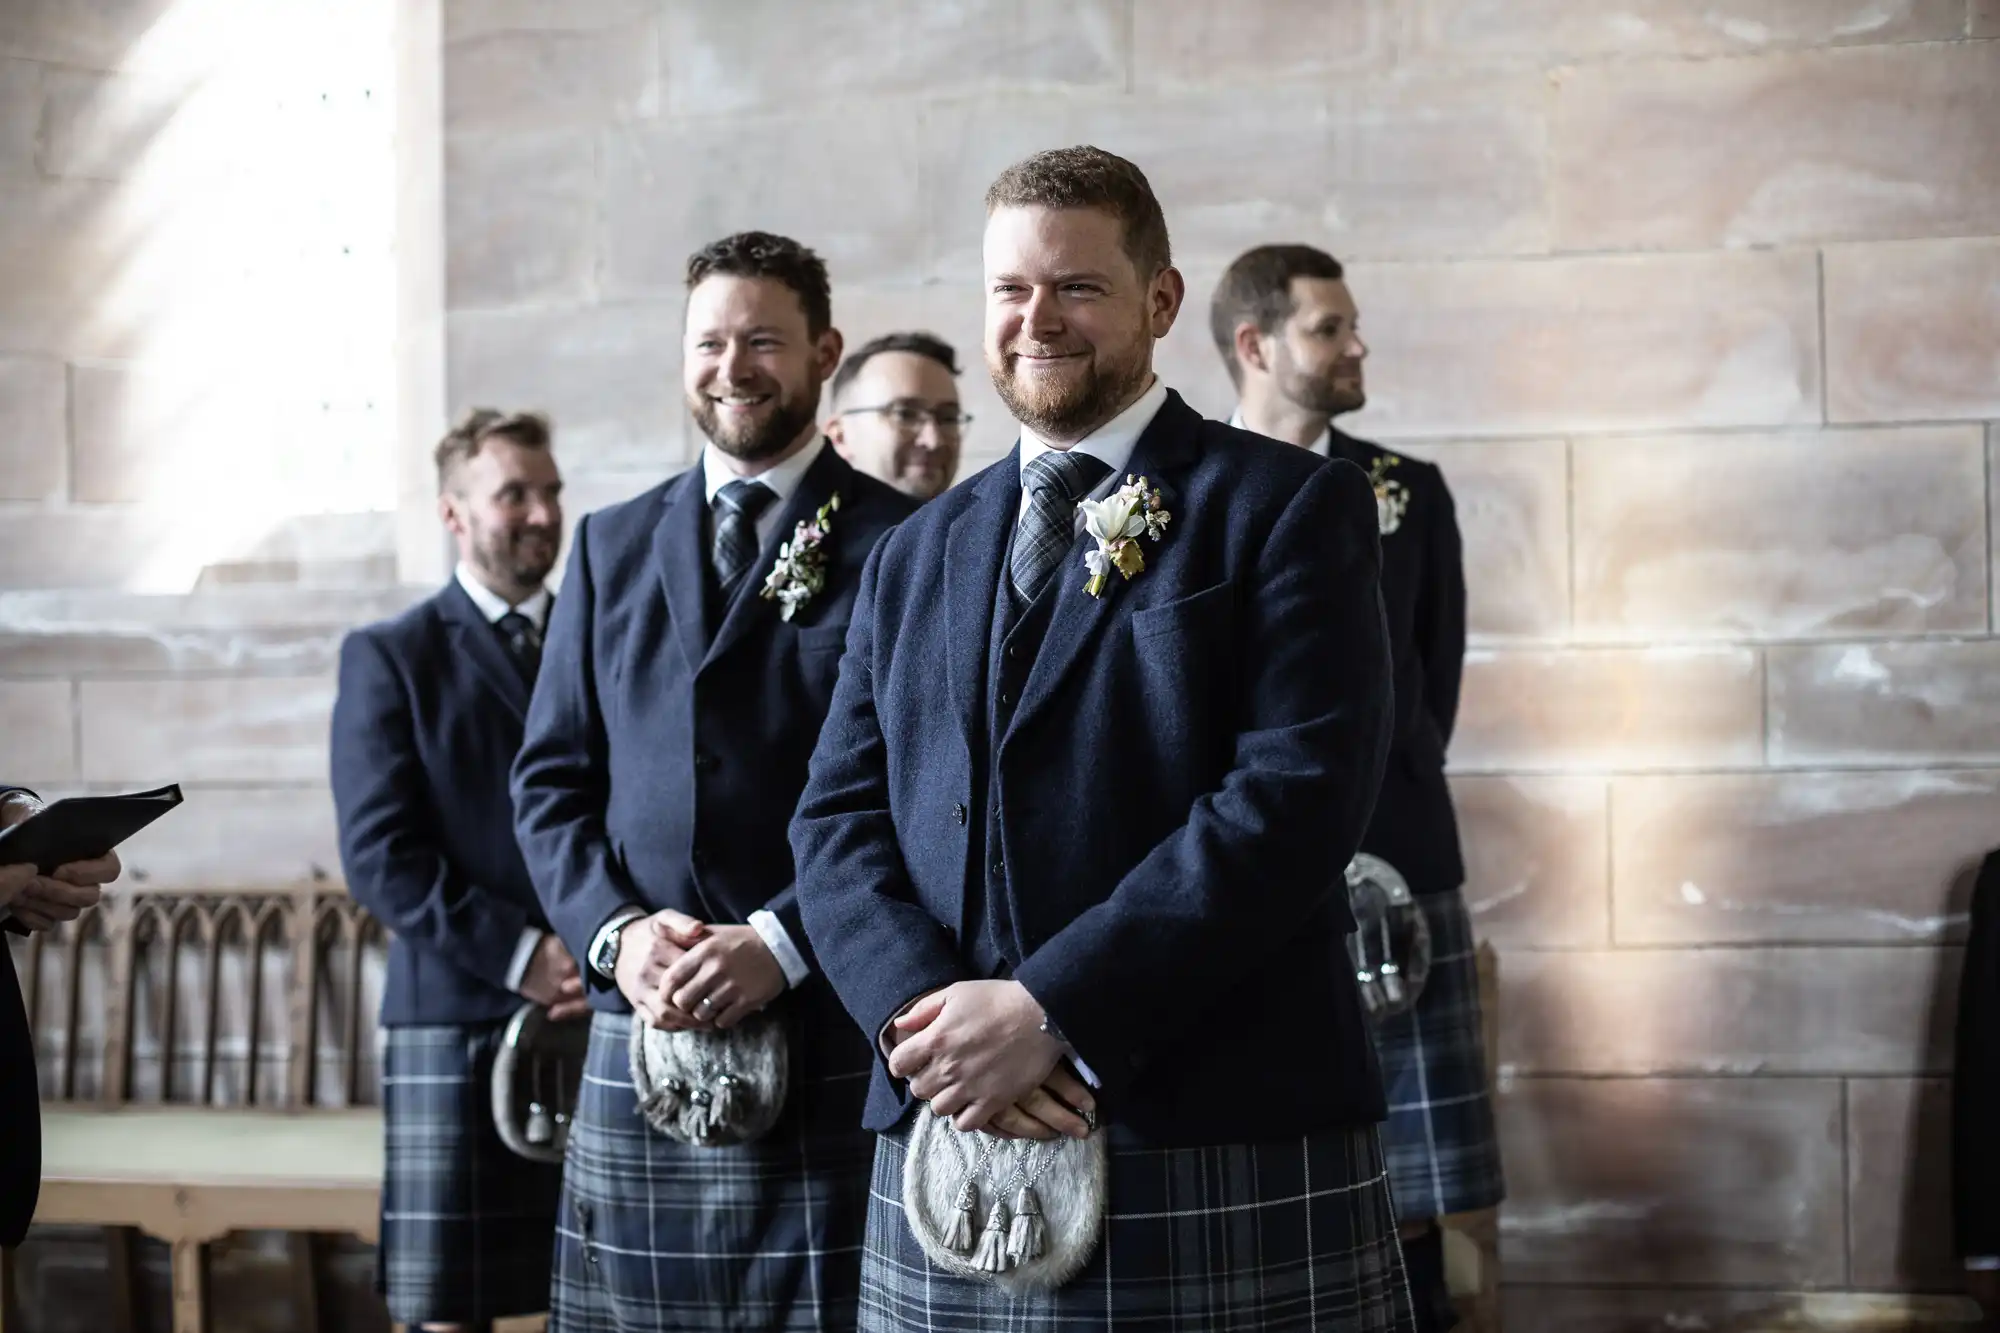 Groom smiling in kilt with groomsmen in background at wedding ceremony.